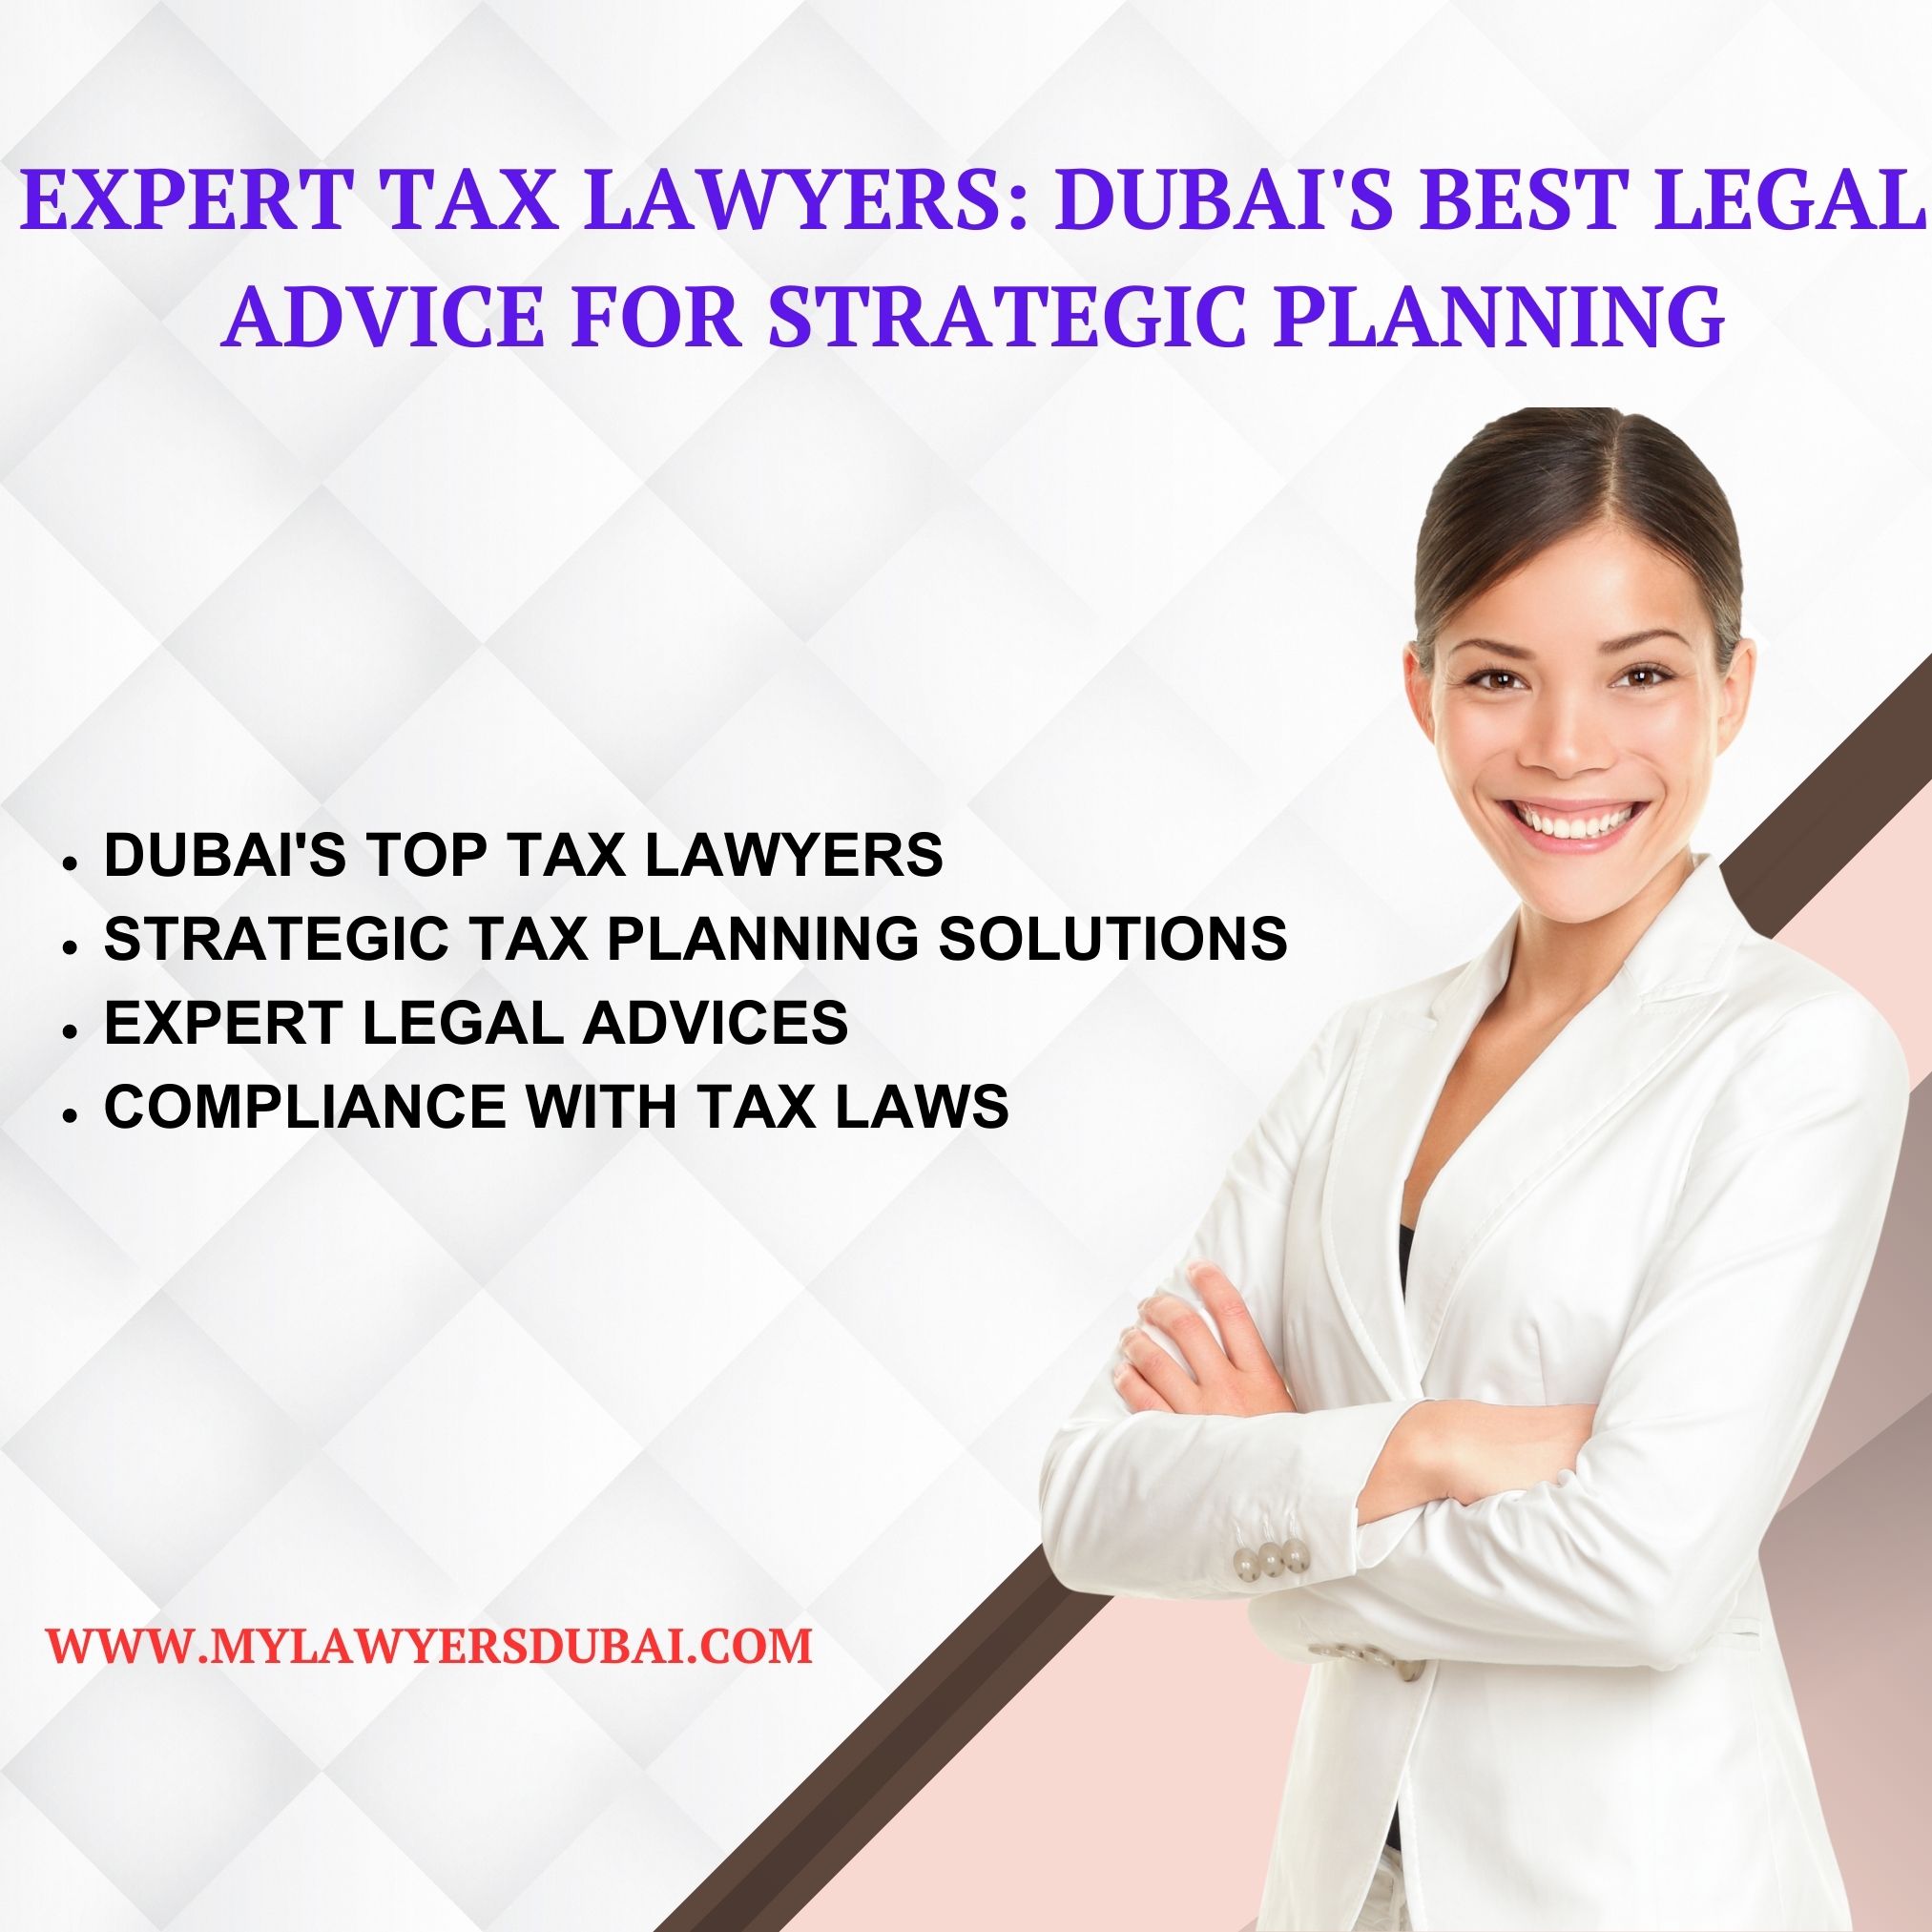 Strategic Tax Lawyers in Dubai for Tax Planning and Compliance